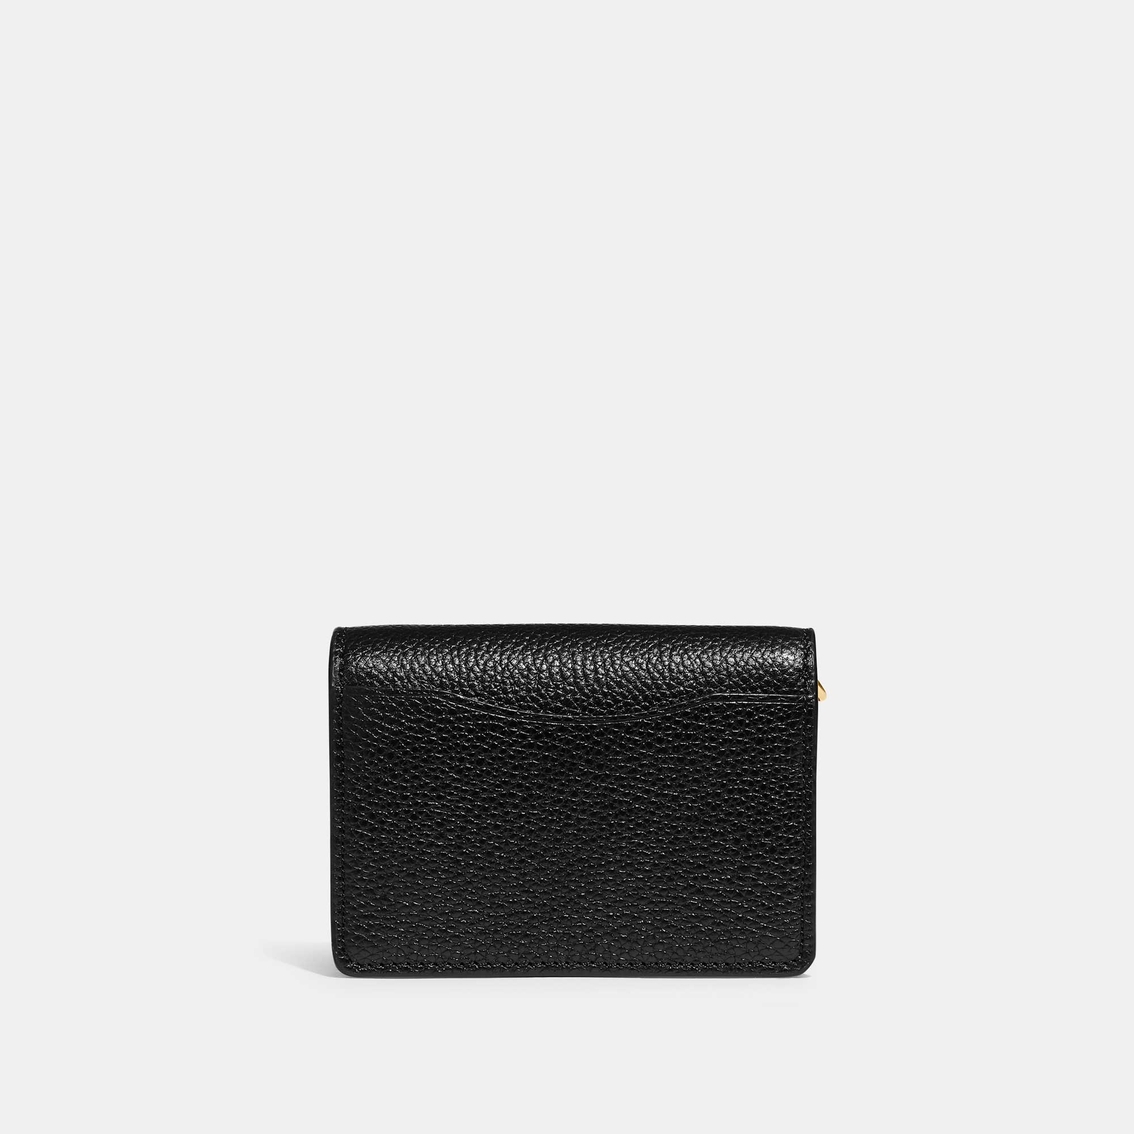 COACH Polished Pebbled Leather Half Flap Card Case - Image 2 of 4